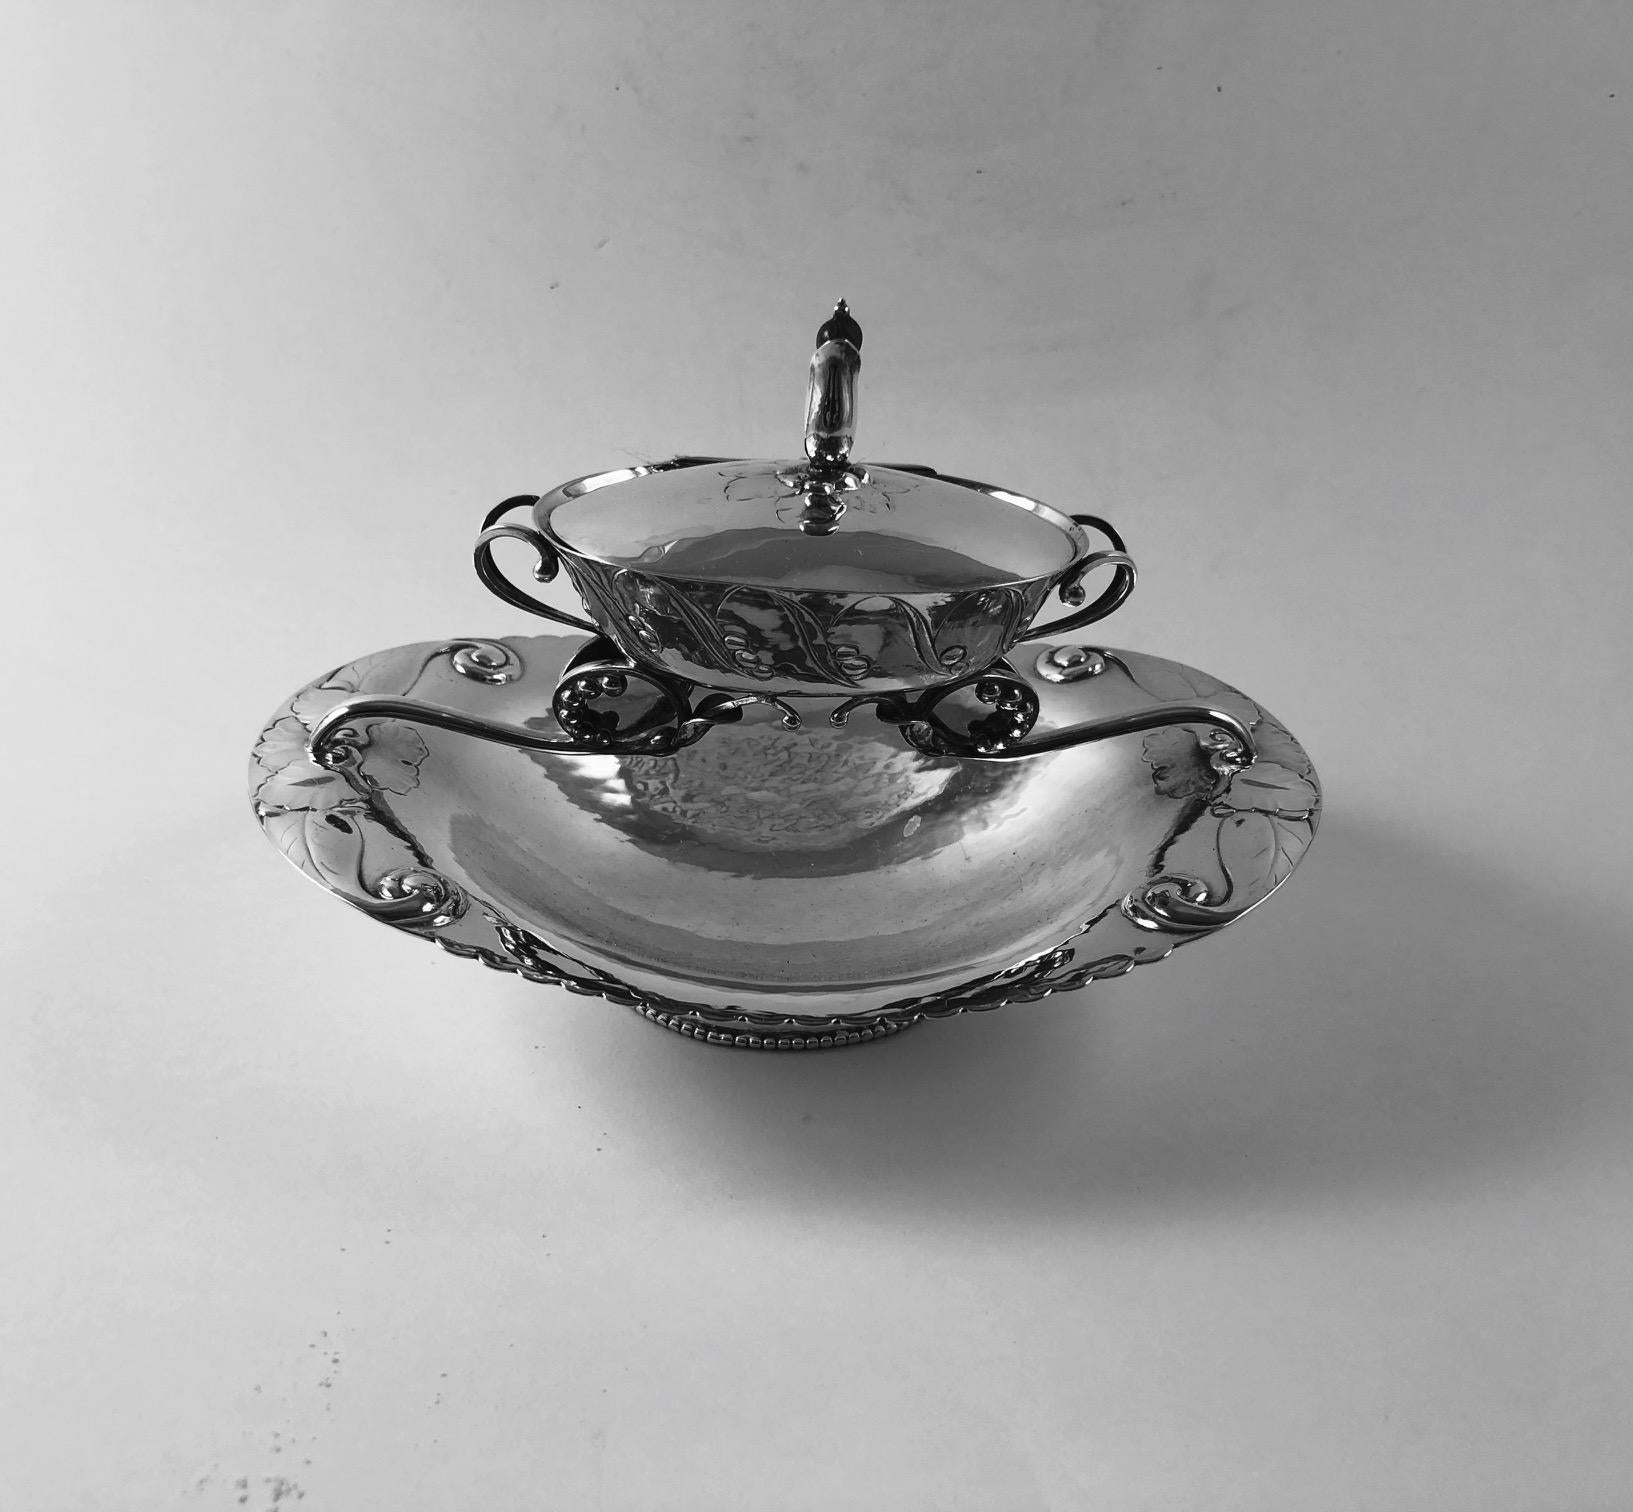 Georg Jensen early two-tiered oval handcrafted 830 silver dish with amber finial, design #81 by Georg Jensen. Most likely used as an ashtray and the top tier to hold match sticks. This piece is date stamped 1919 Georg Jensen hallmarks and at that